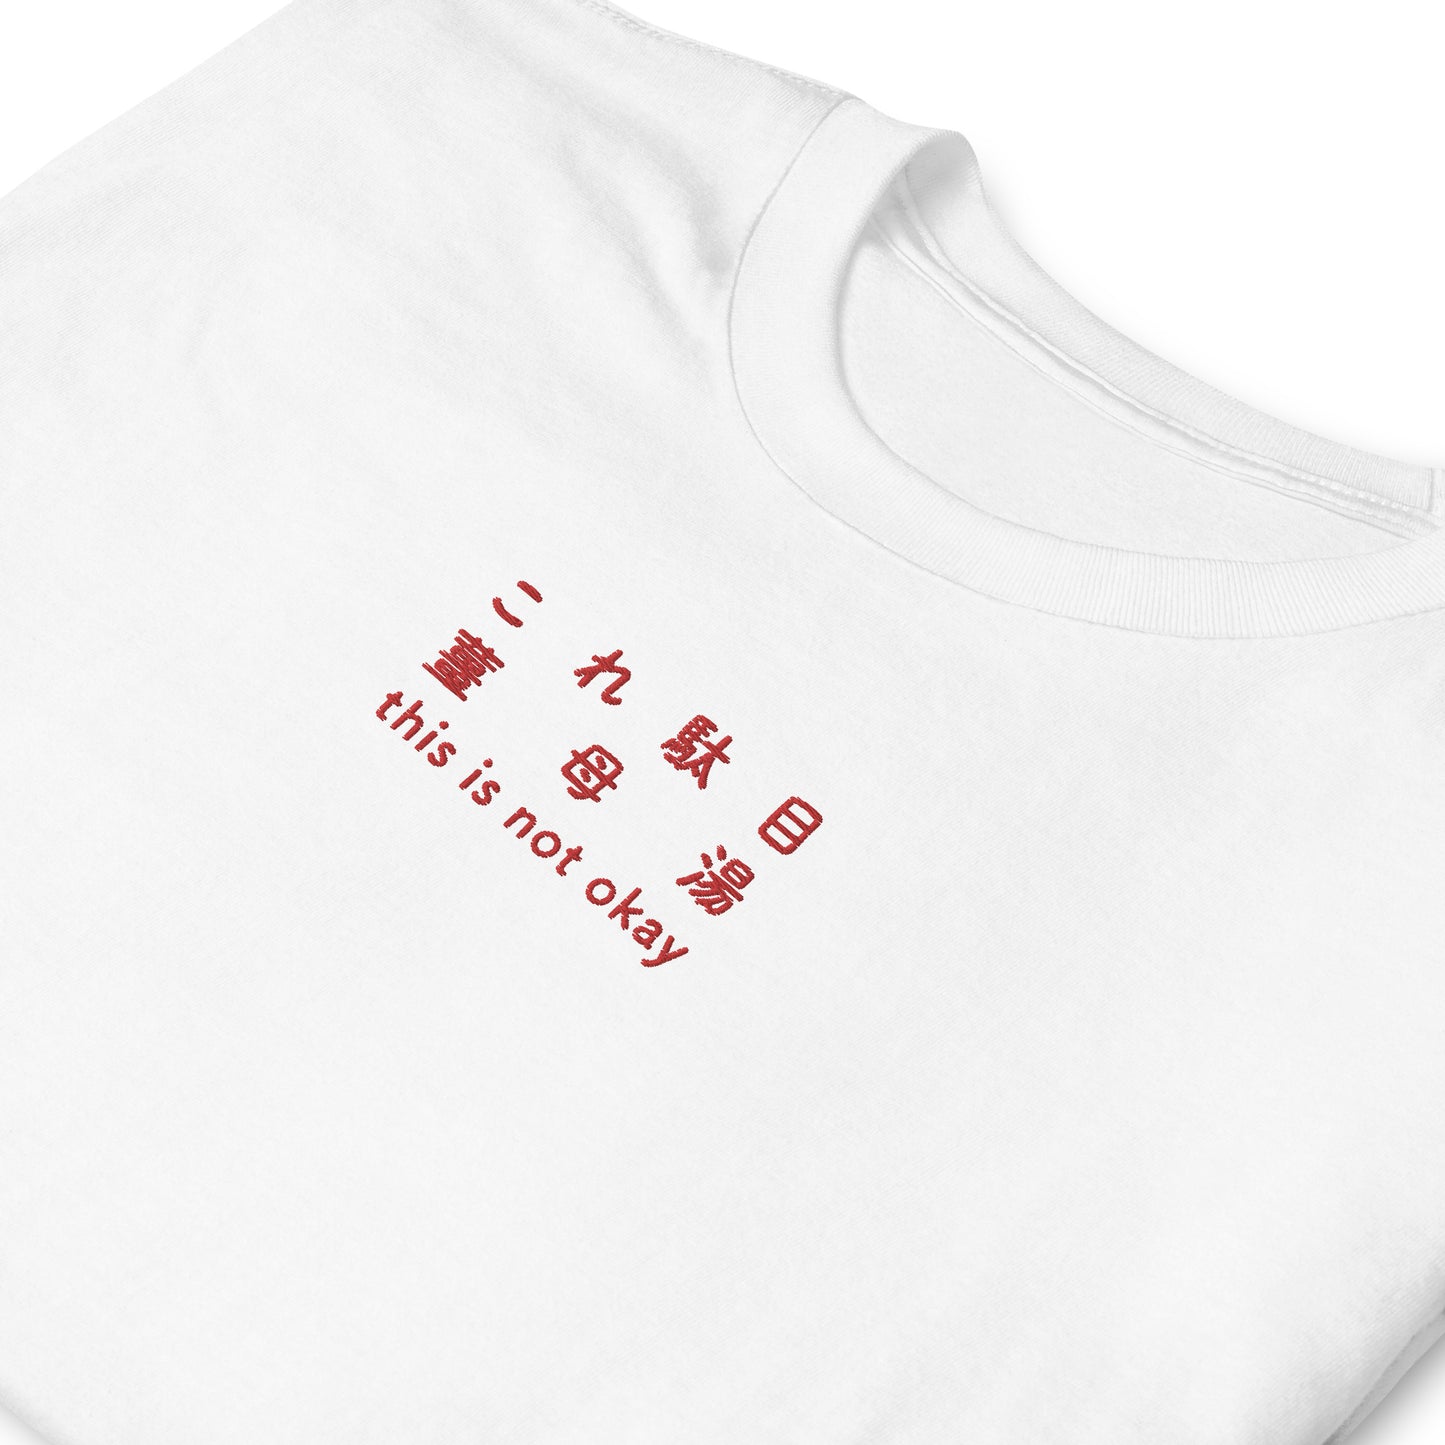 White High Quality Tee - Front Design with an Red Embroidery "This Is Not Okay" in Japanese,Chinese and English